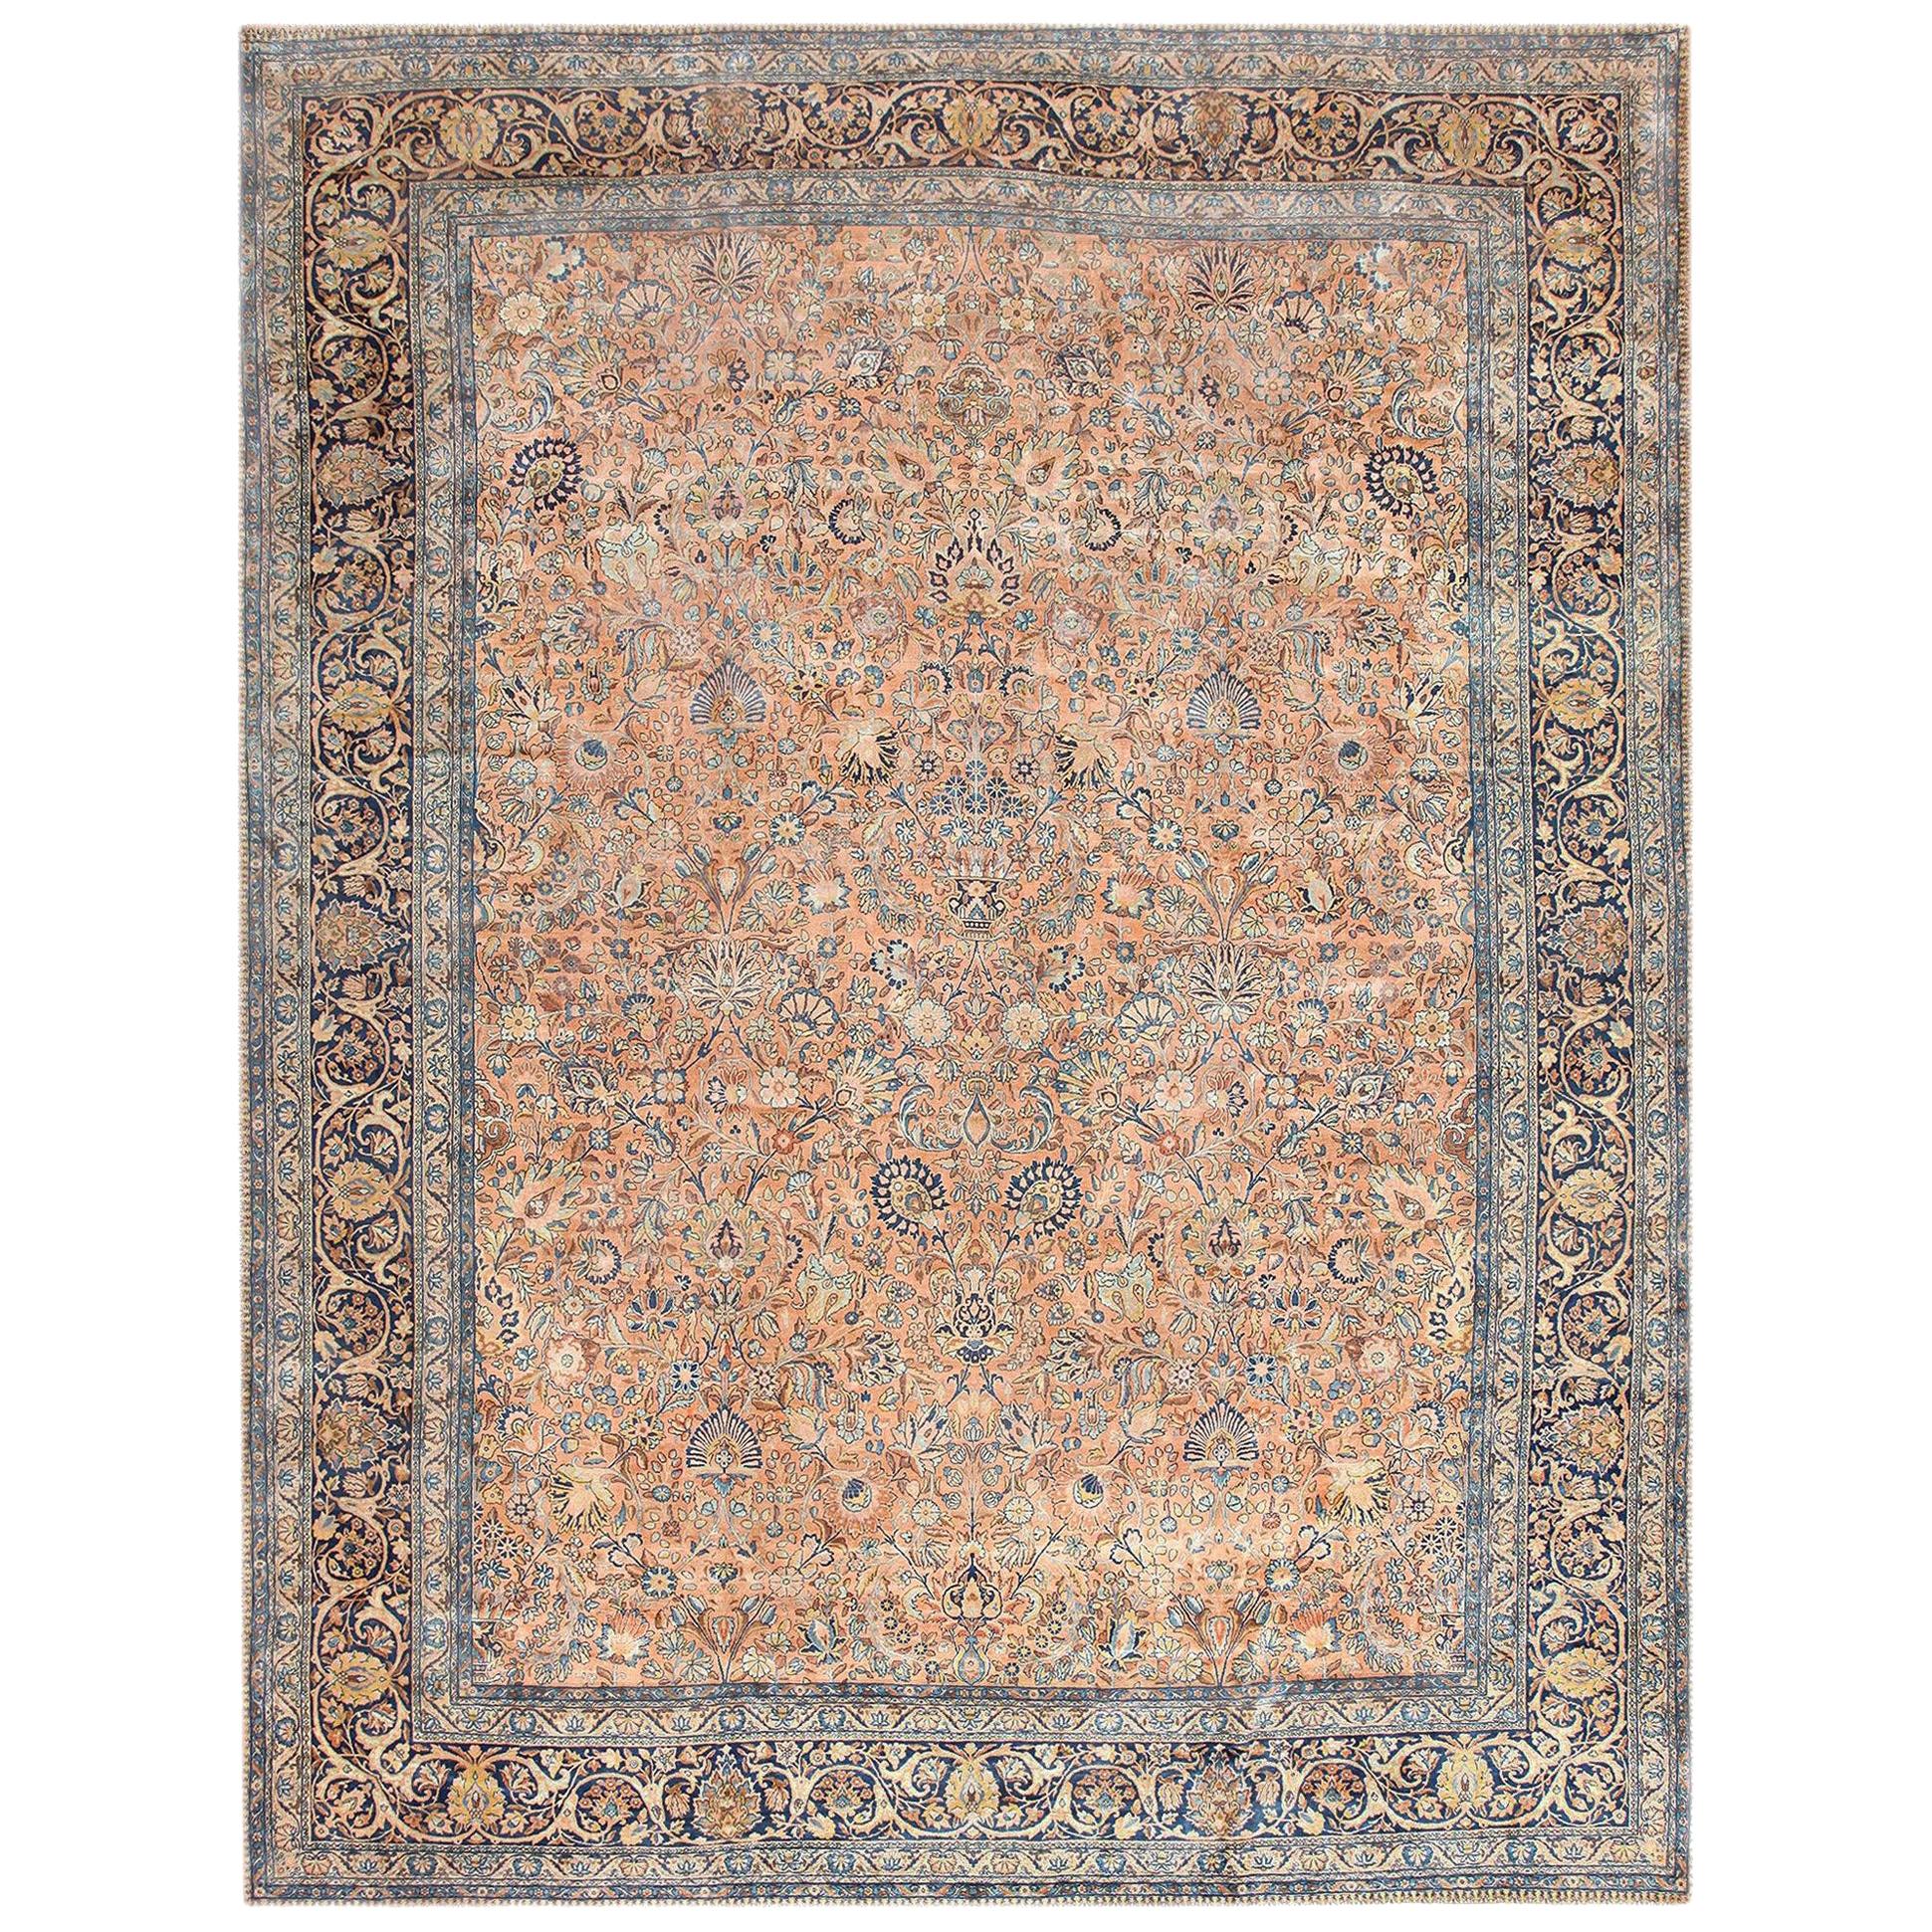 Large Antique Persian Kerman Rug. Size: 11 ft 10 in x 15 ft 6 in